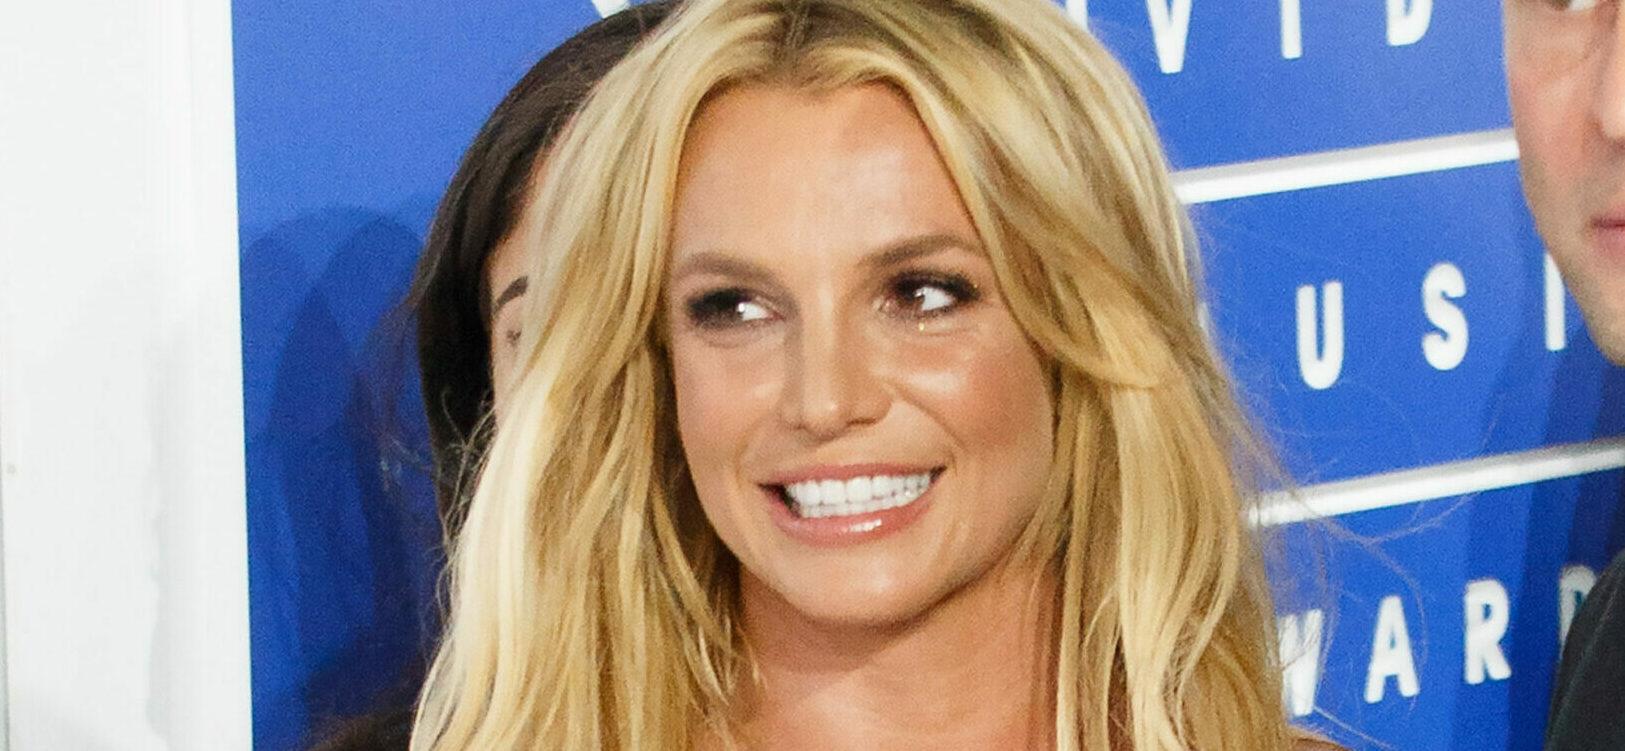 Britney Spears calls Tom Hardy "the British guy"